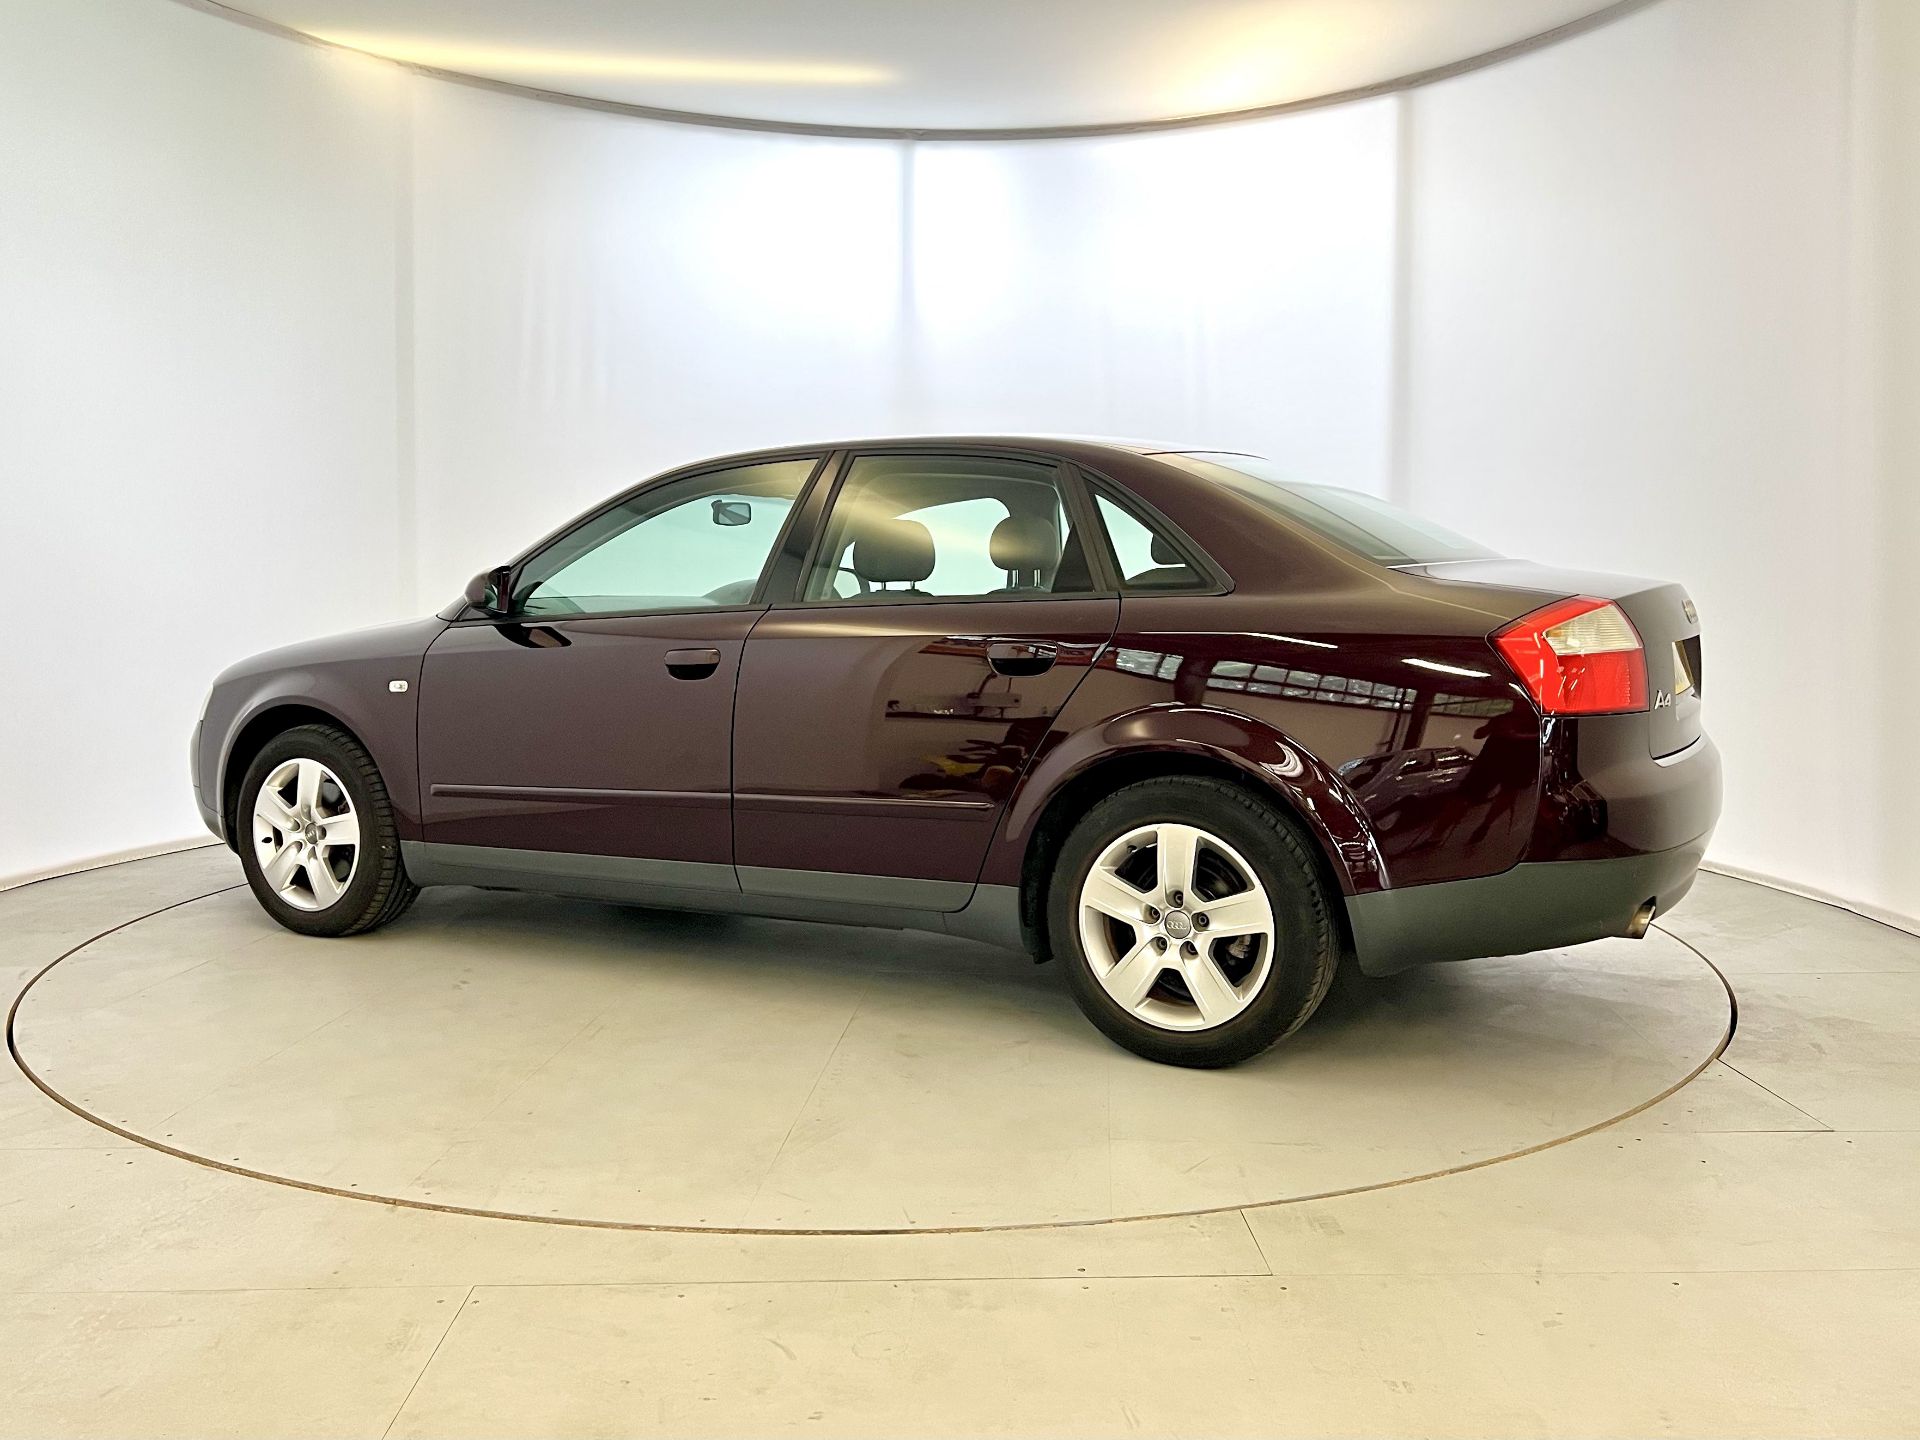 Audi A4 - Image 6 of 37